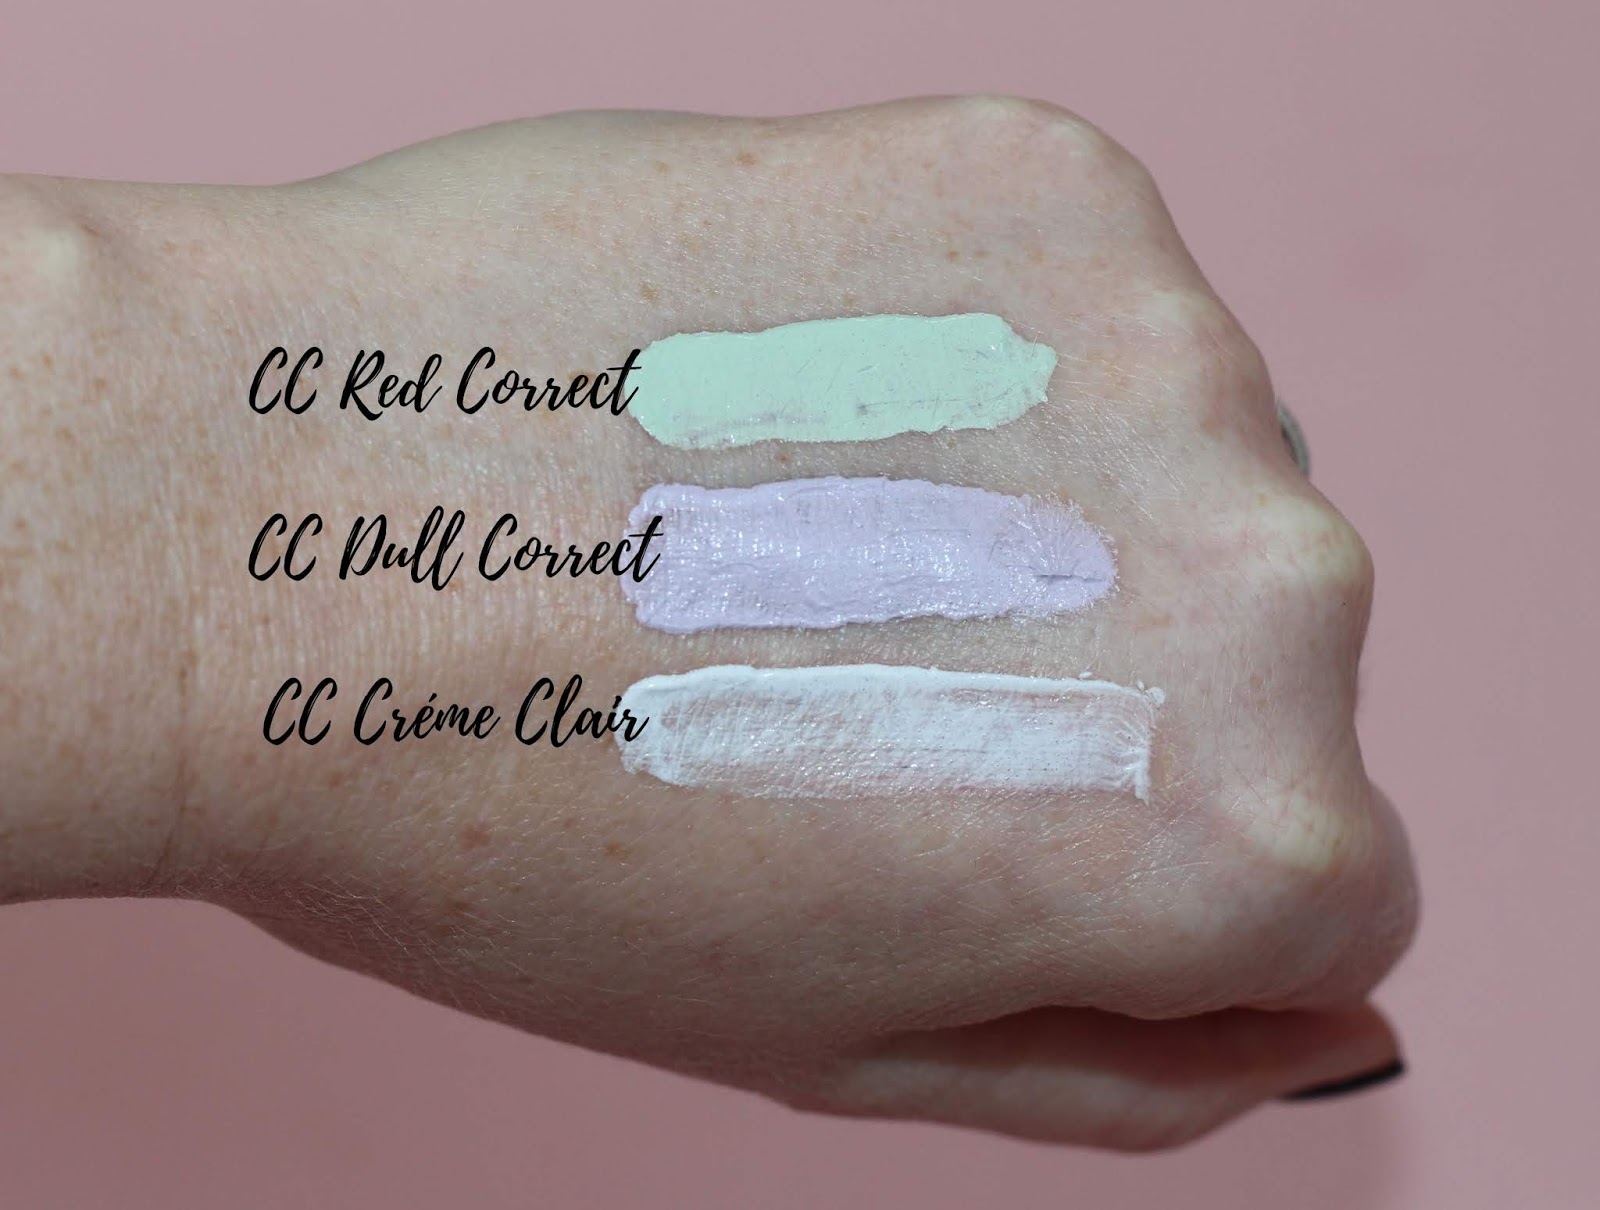 Erborian Dull Correct and Photos - Erborian CC Cream Shade is right you? | Pink Paradise Beauty